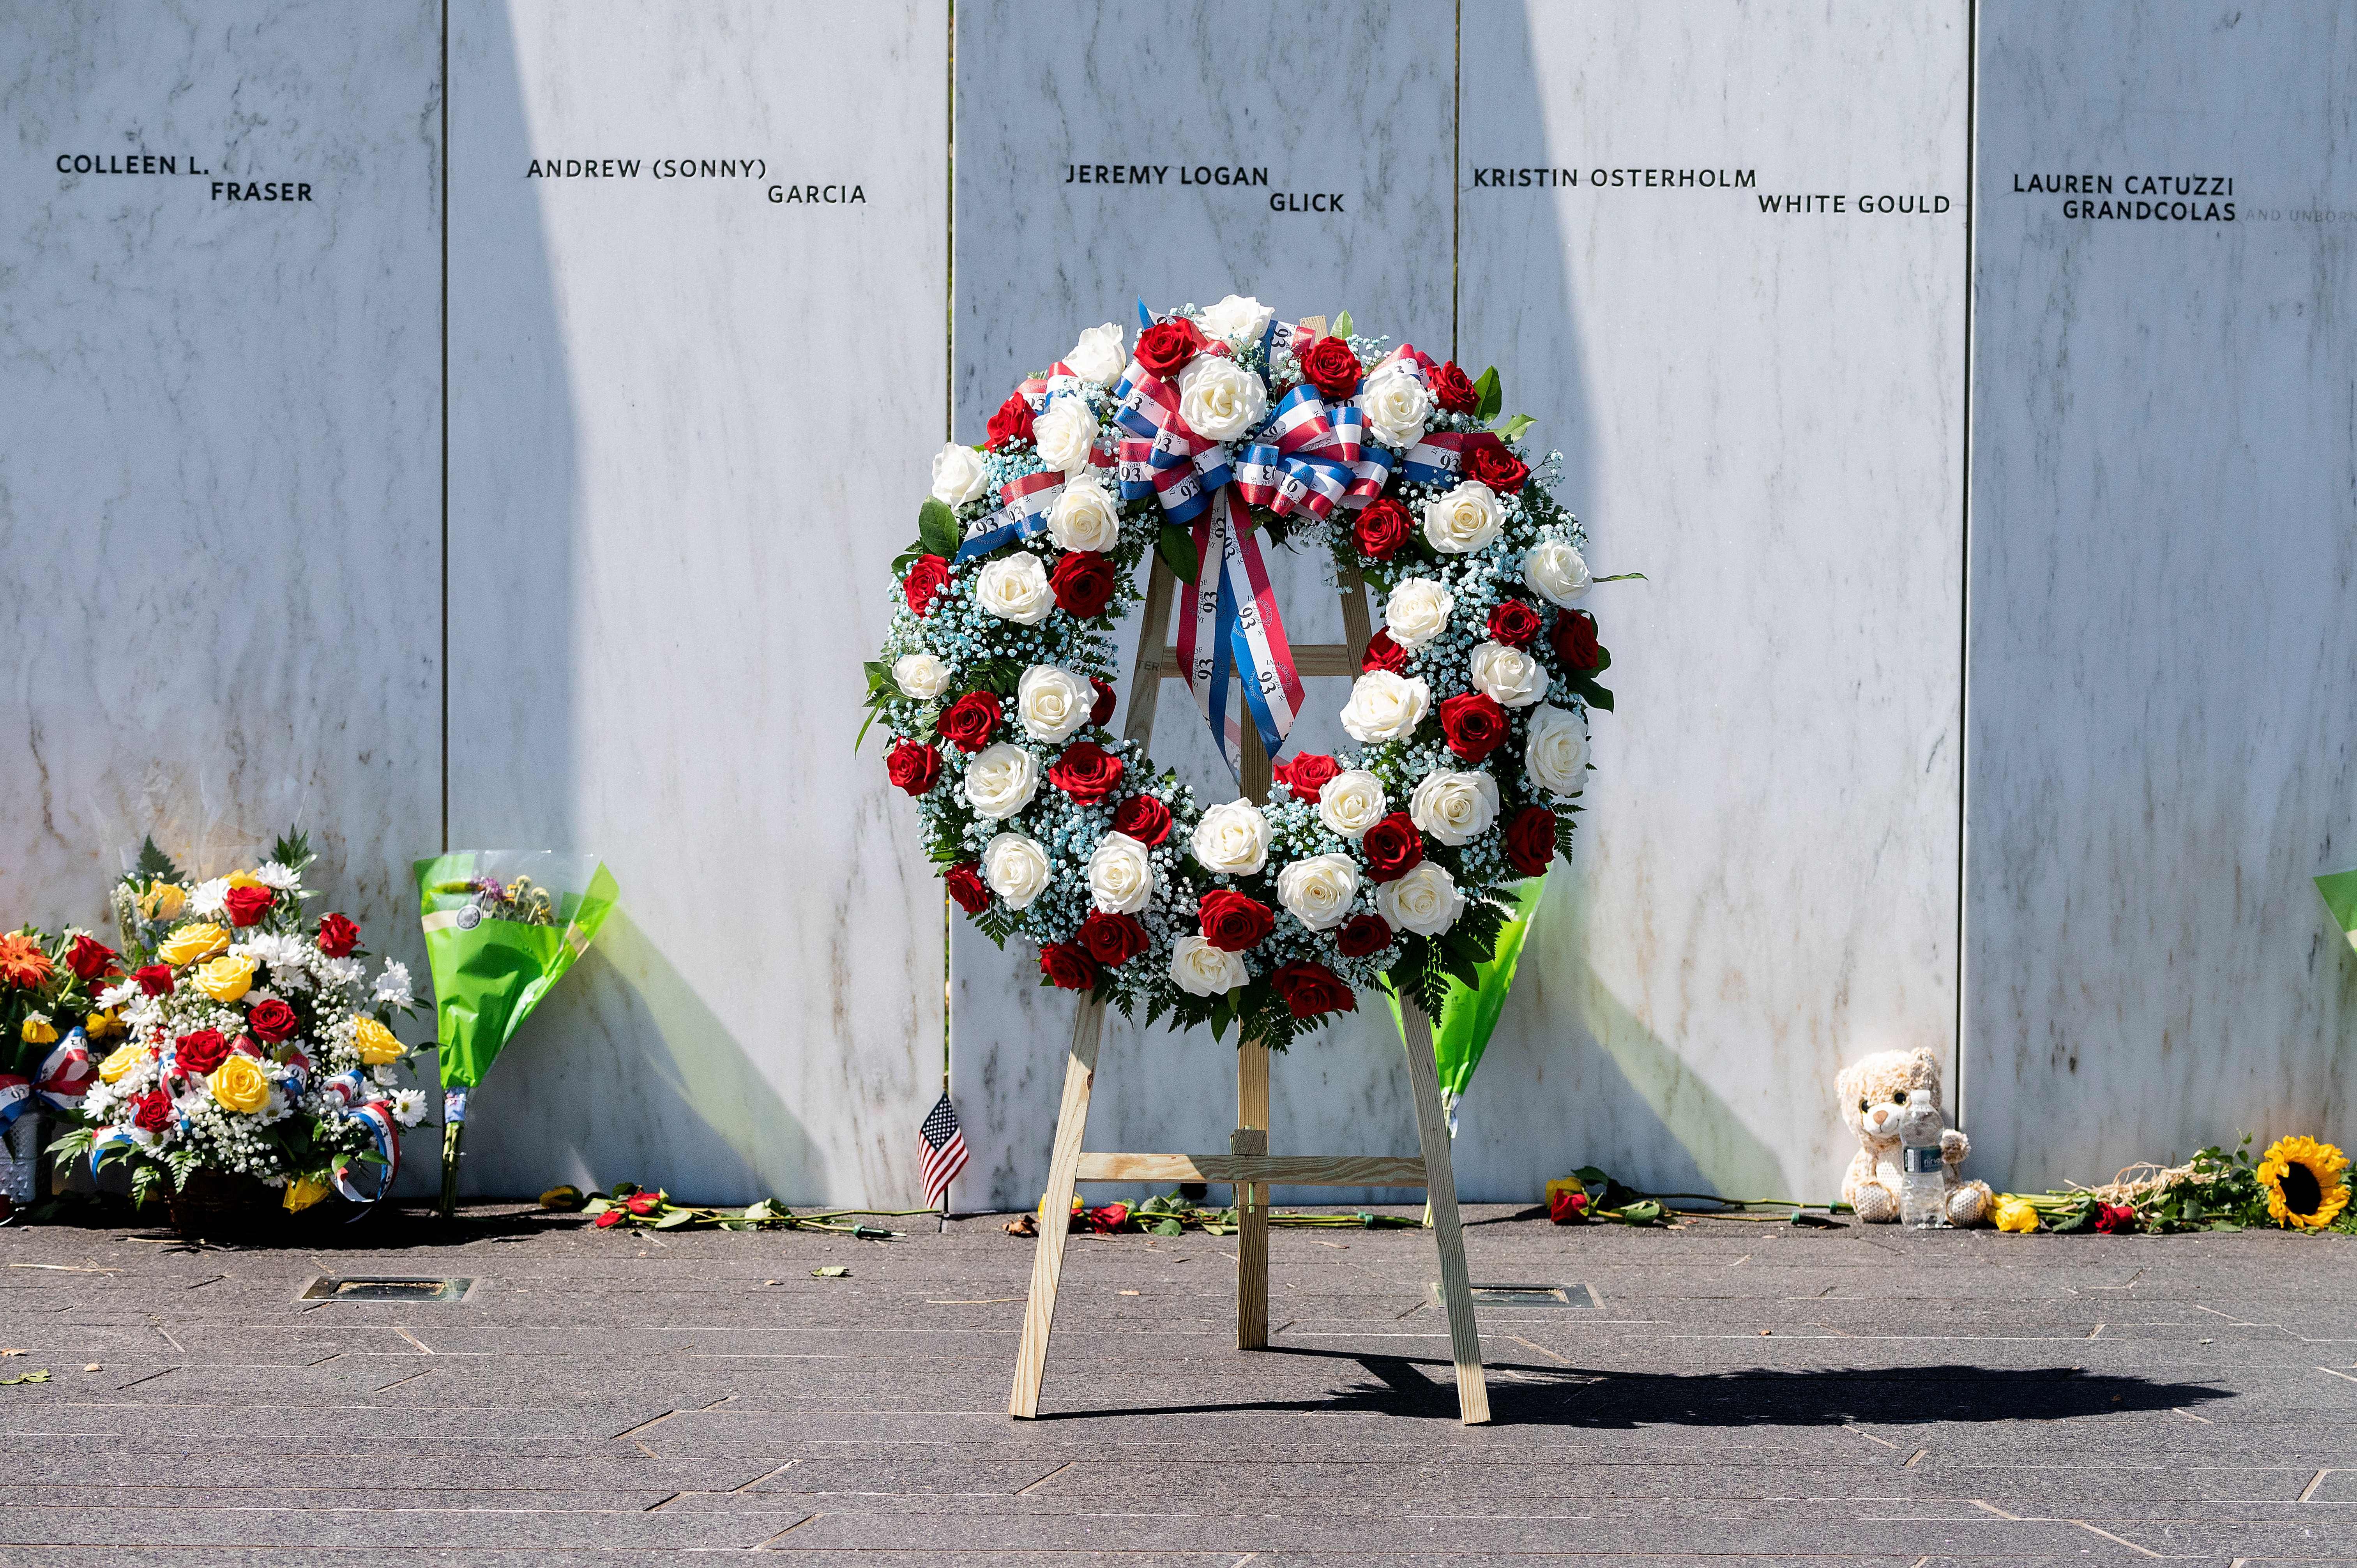 A wreath that was placed by US President Joe Biden and First Lady Jill Biden stands in Shanksville, Pennsylvania, on September 11, 2021.